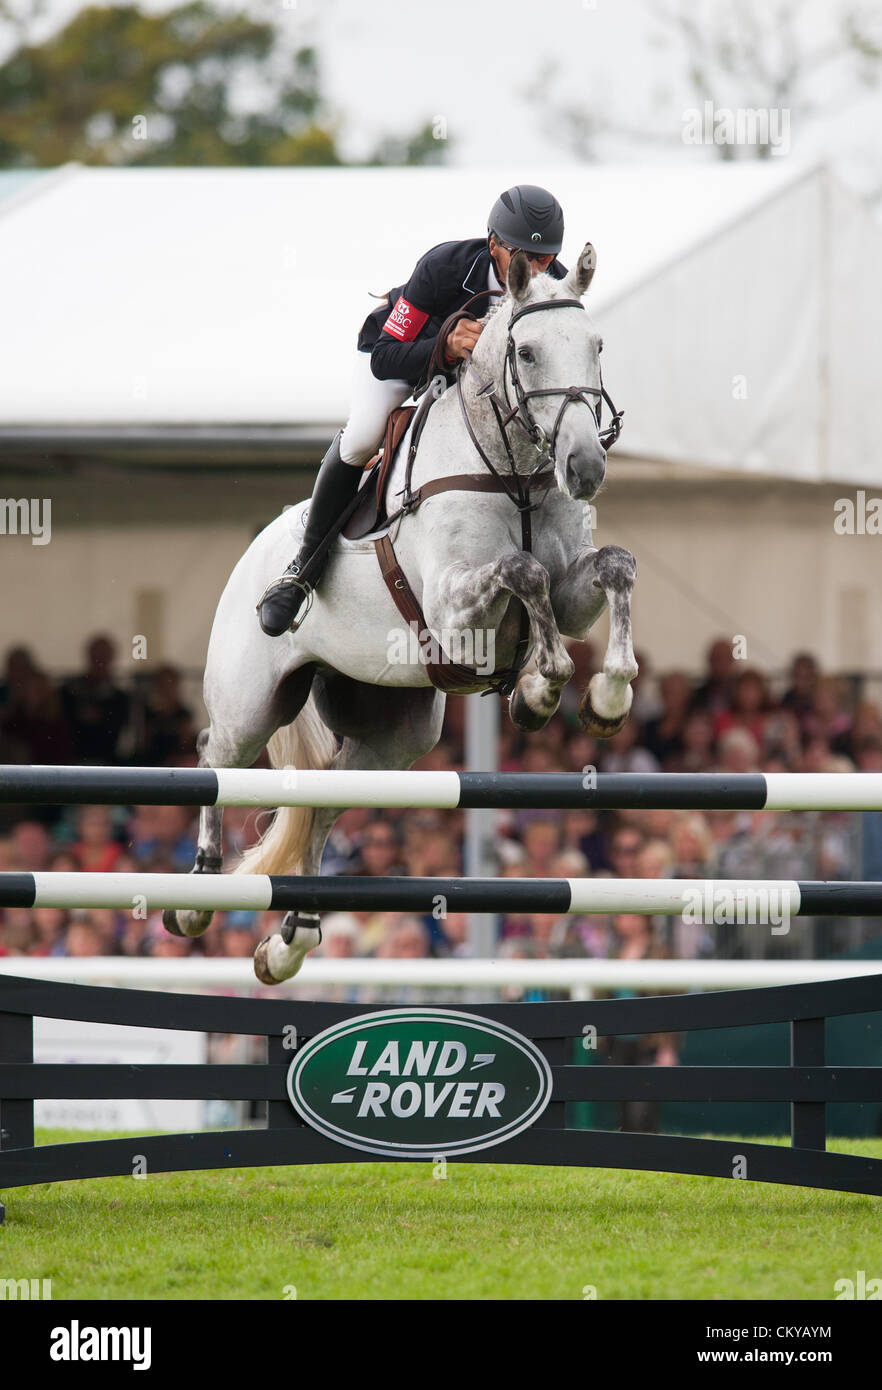 Burghley House, Stamford, UK - Kiwi eventer Andrew Nicholson and his horse Avebury show jumping during the  Land Rover Burghley Horse Trials, 2nd September 2012. Stock Photo